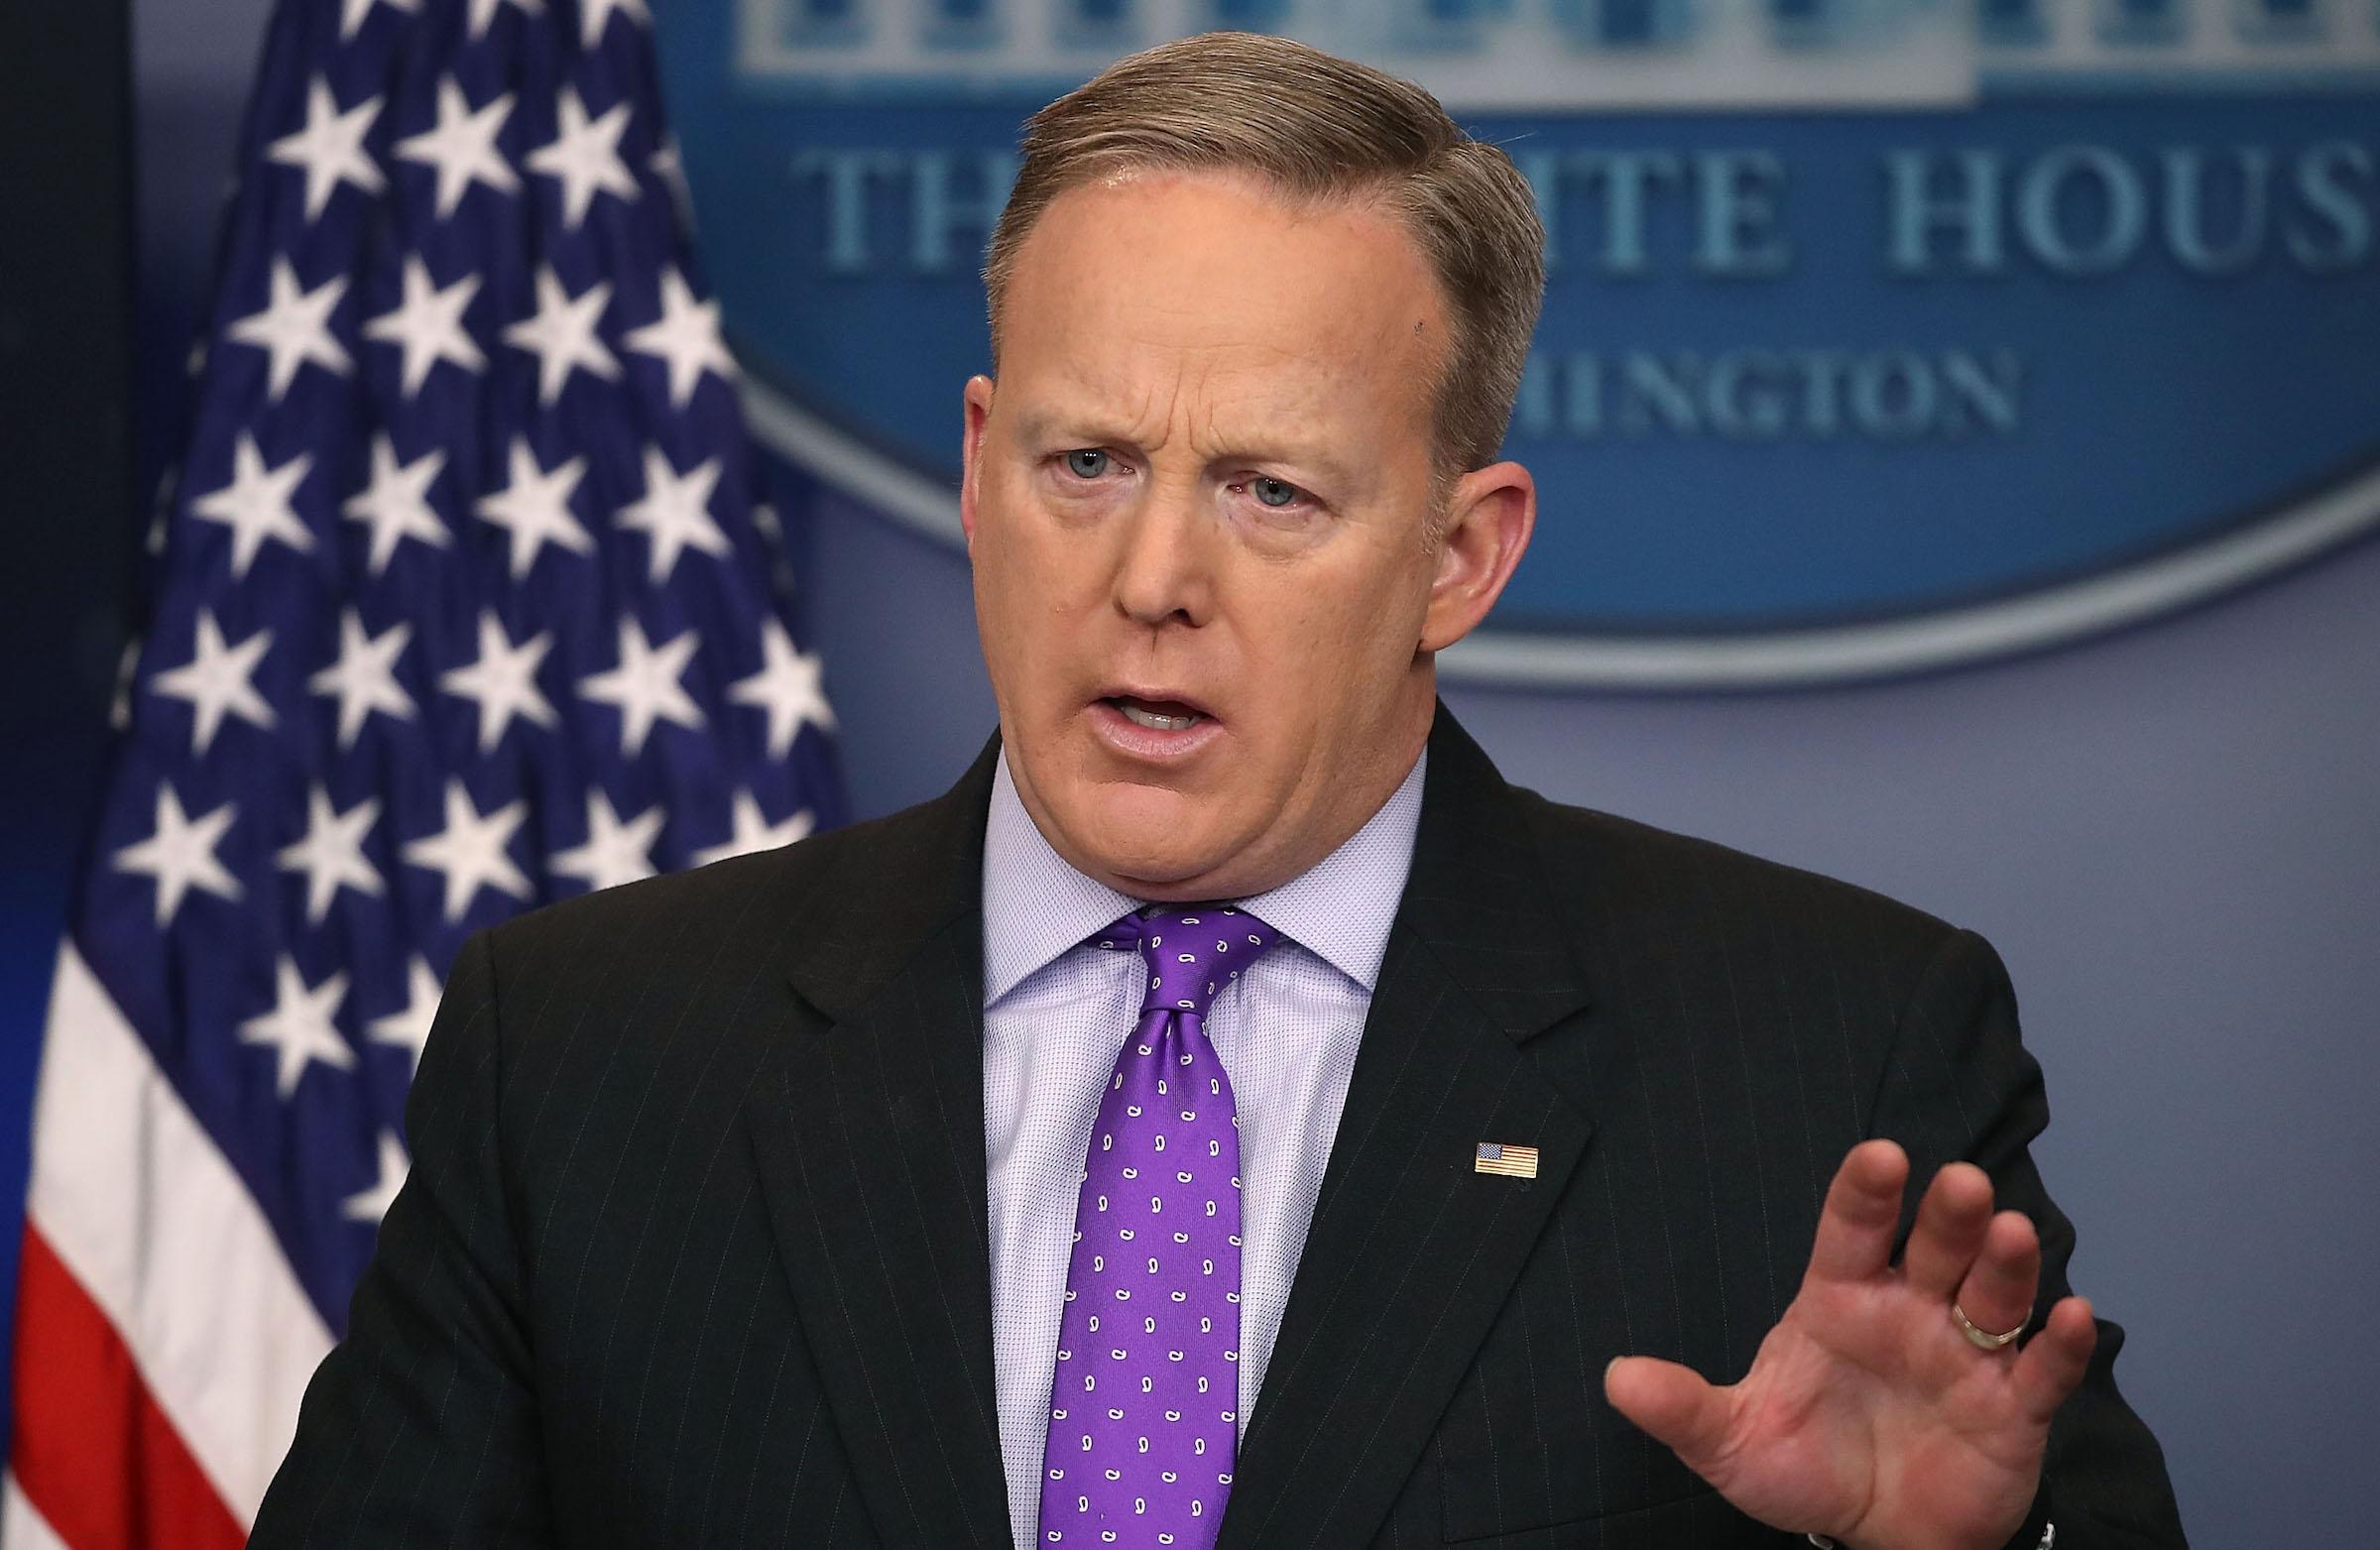 Mr Spicer questioned why anyone would protest about healthcare